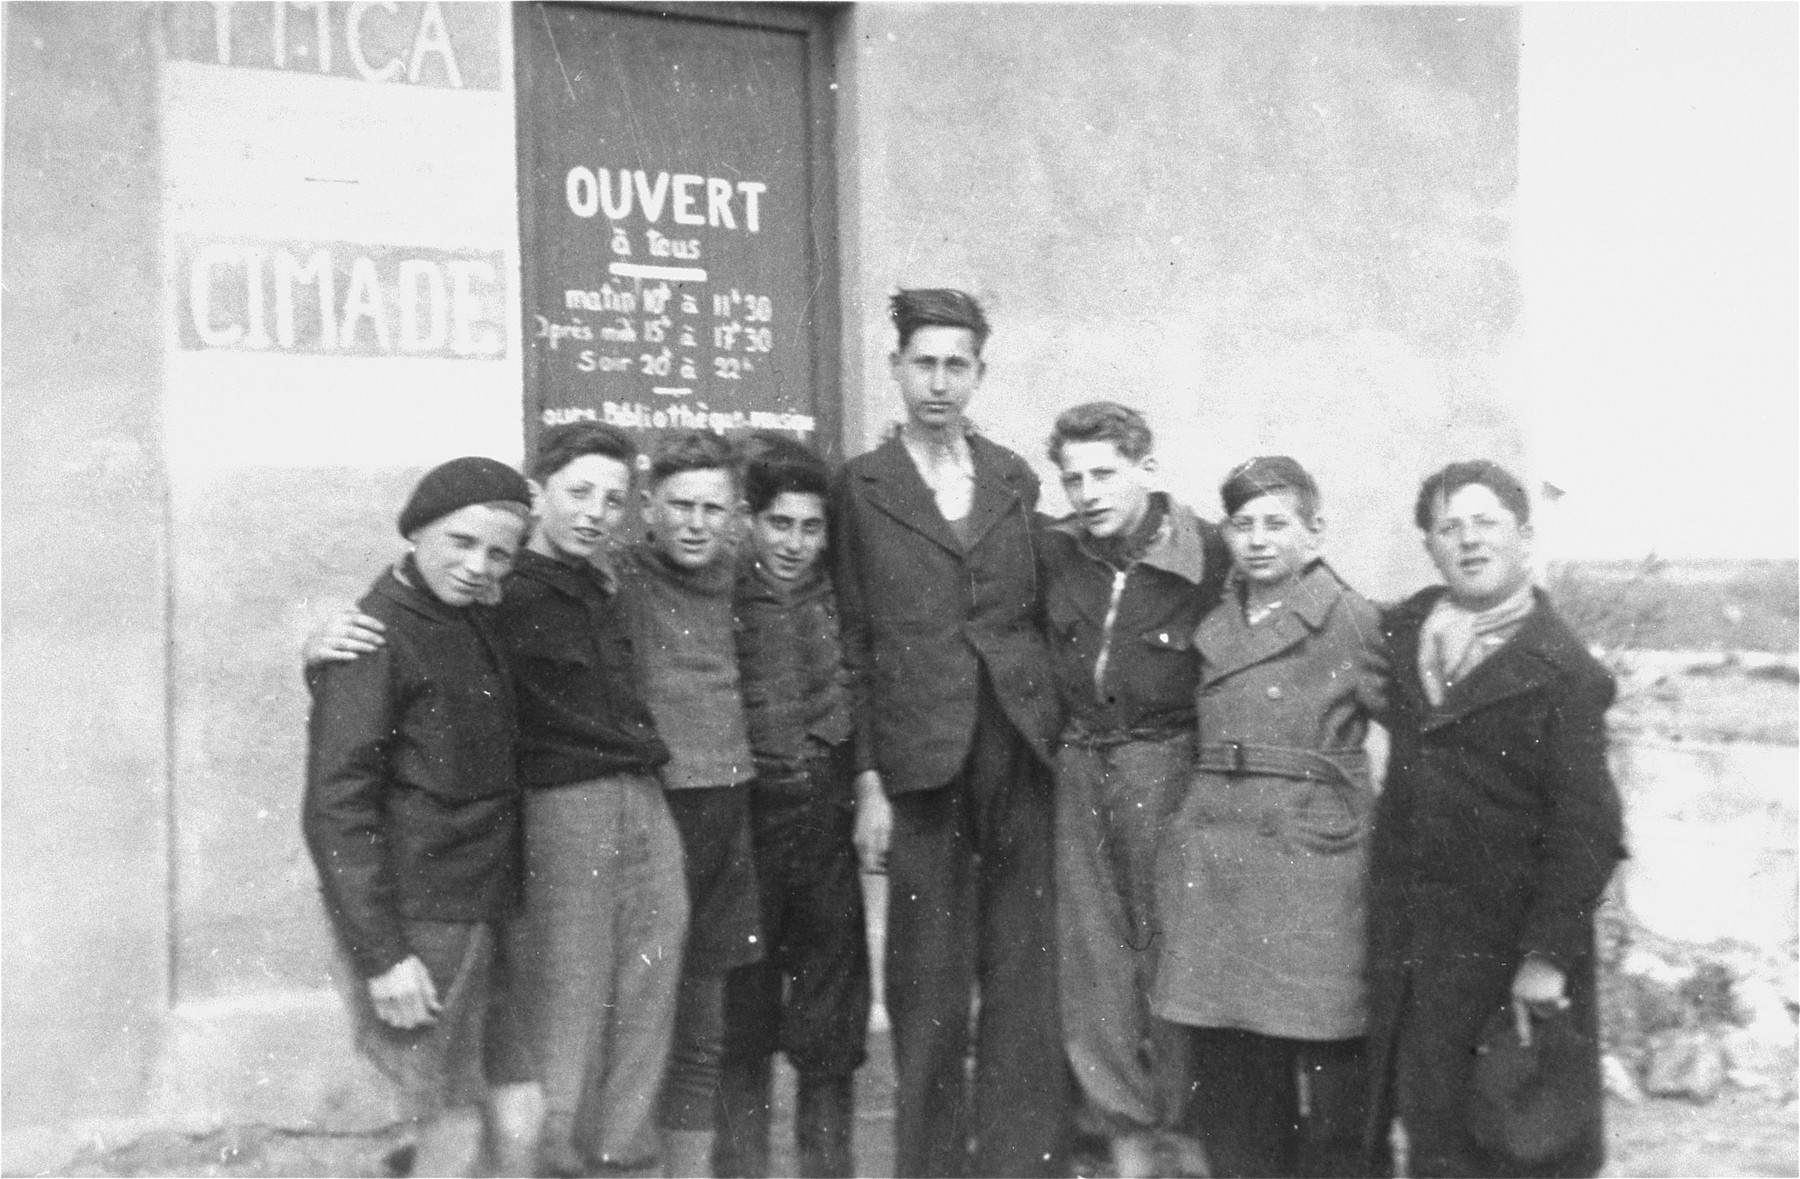 Members of a boy scout troop organized by Simone Weil in the Rivesaltes transit camp.

Second from right is Werner Heilbronner (now Daniel Barnea).  Fourth from right is his brother Kurt (now Uri) Heilbronner.